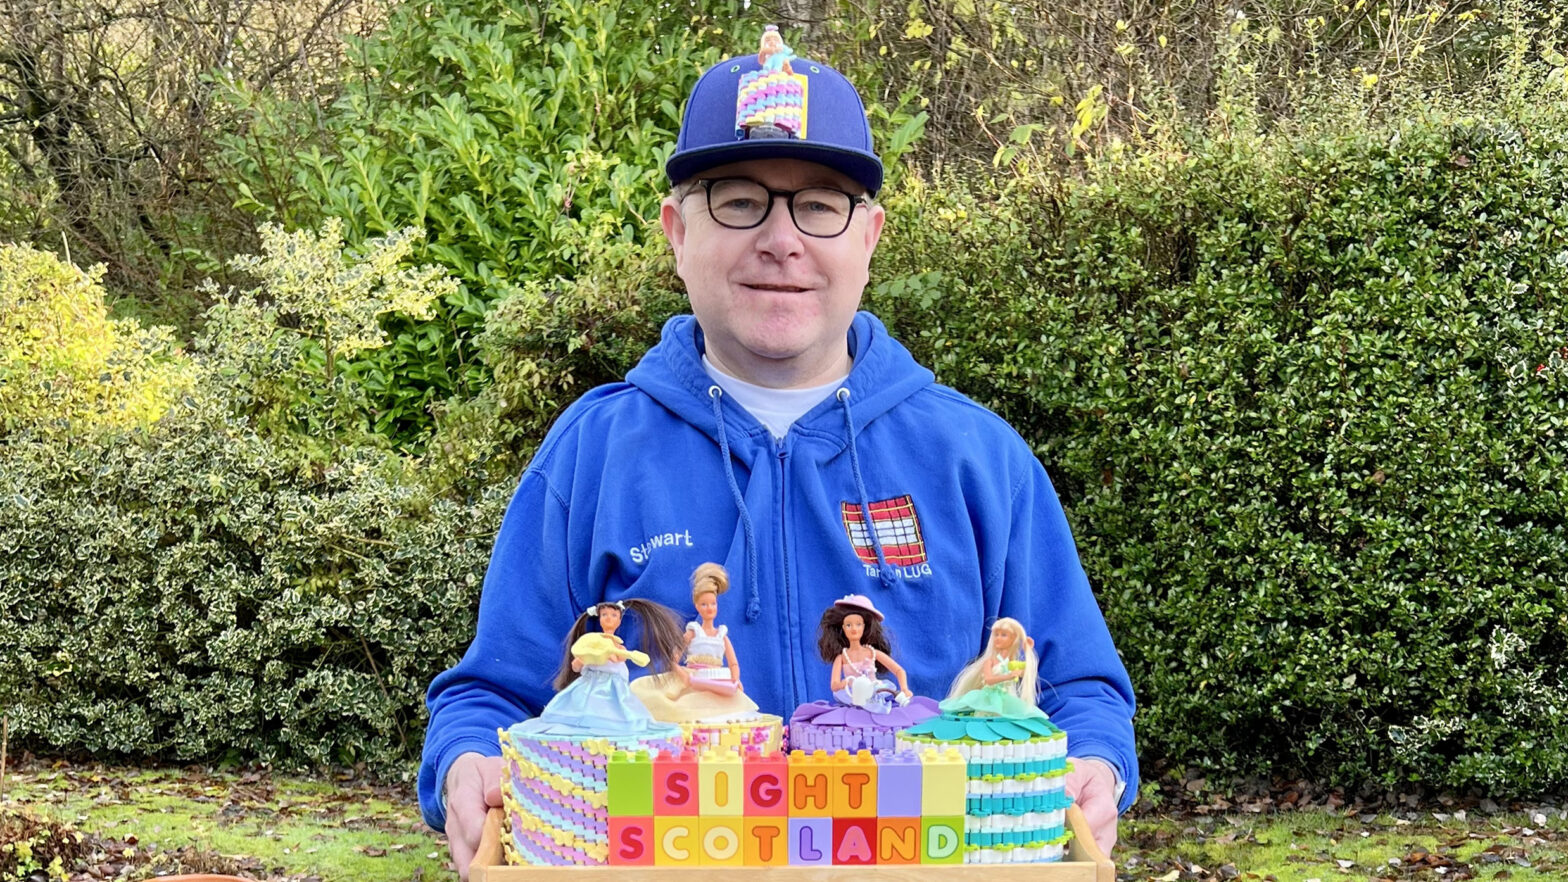 Stewart standing outside holding a tray with 4 different Lego toilet dolls on it and 'Sight Scotland' written in Duplo blocks.